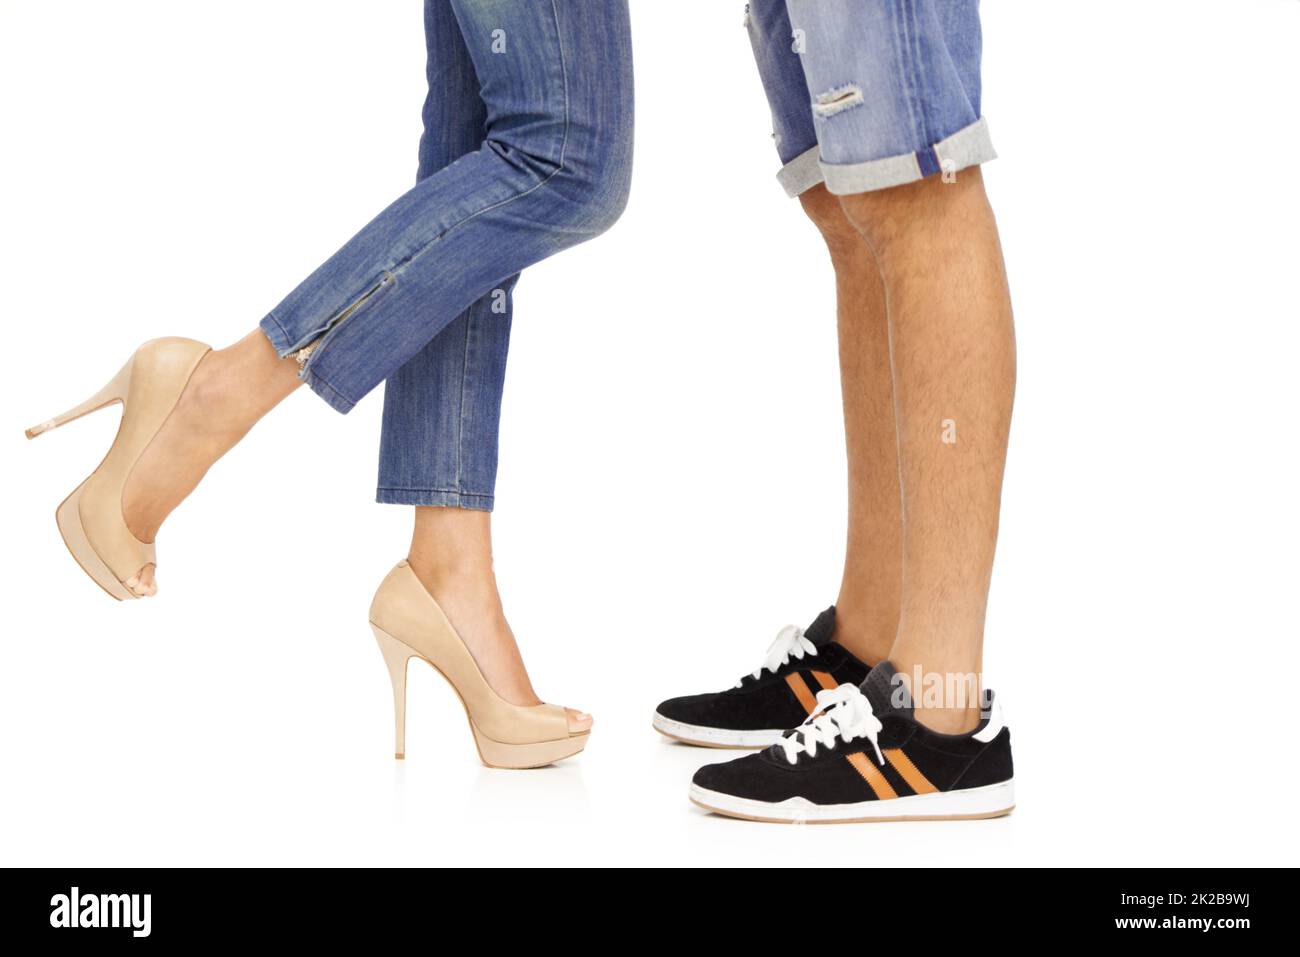 So in love.... Cropped image of a man and womans feet as they stand together in a romantic pose. Stock Photo